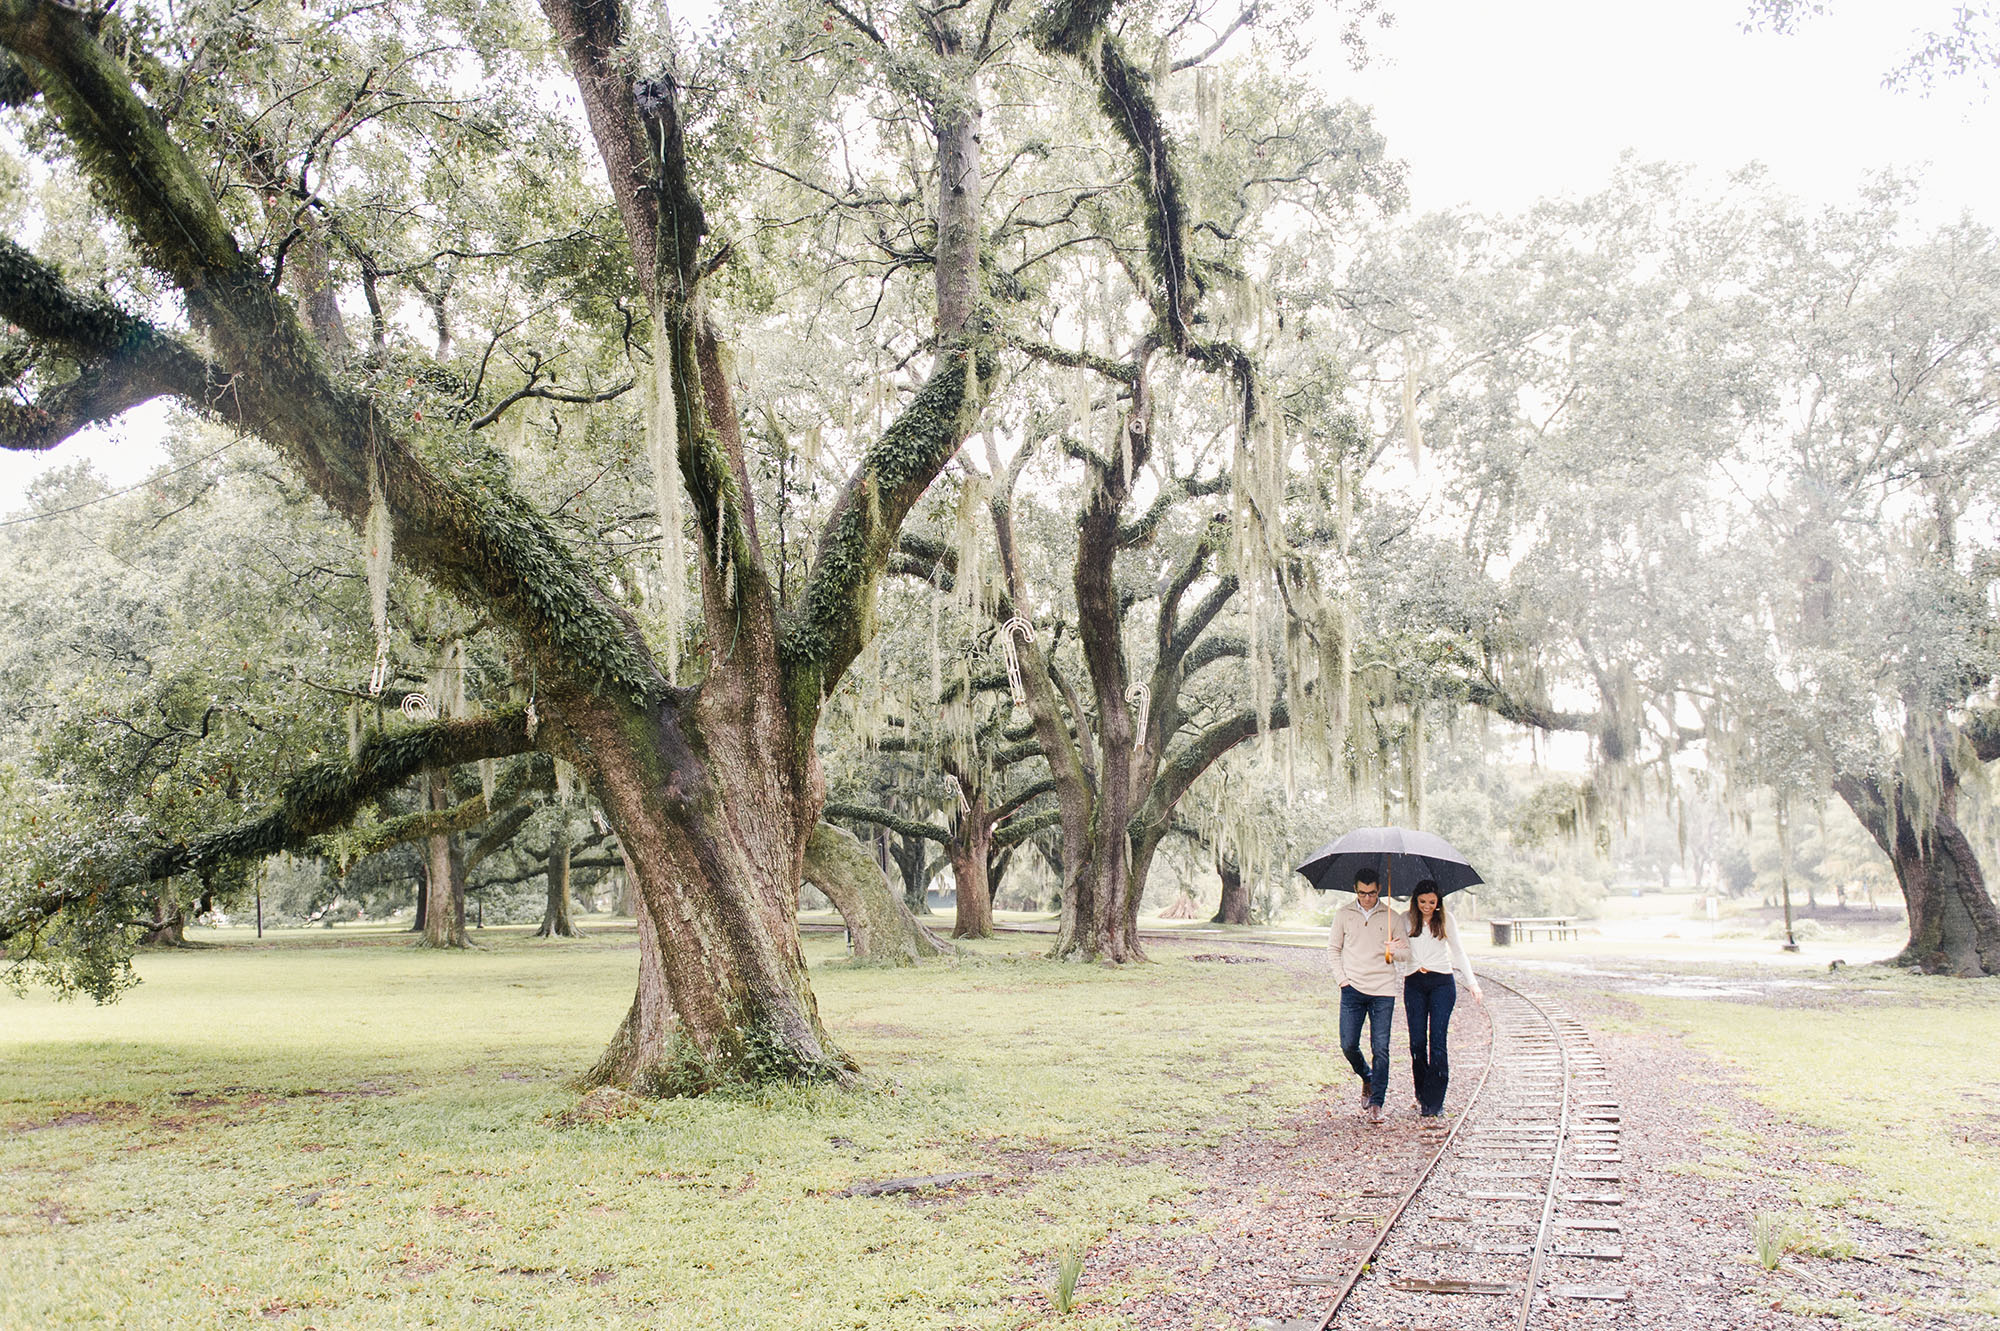 Couple walking through oak trees in the park